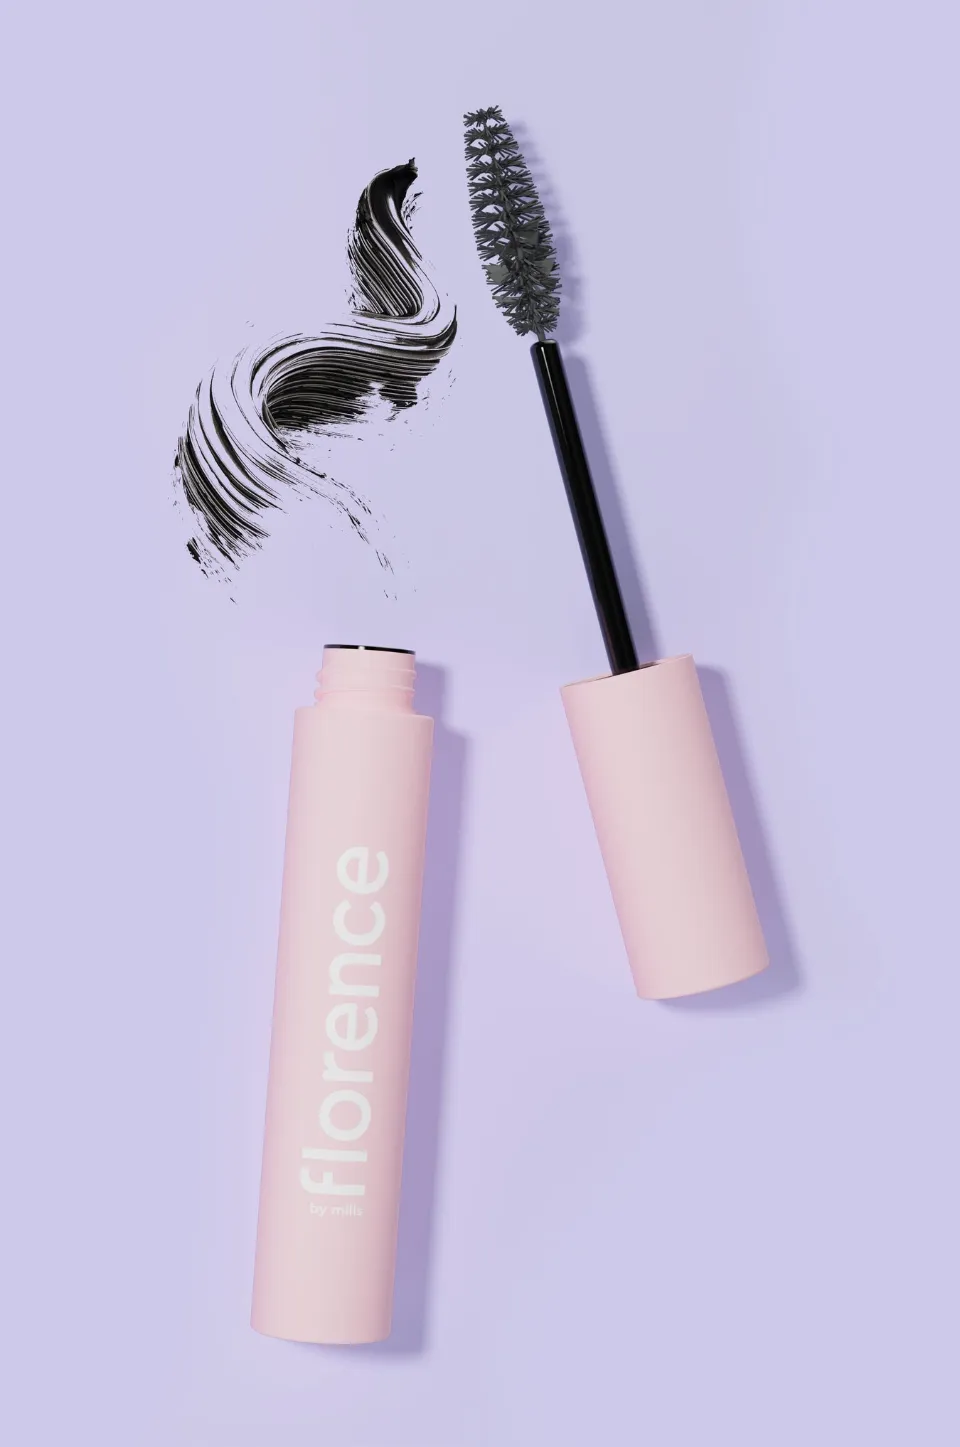 Built to Lash Mascara - Florence by Mills Review